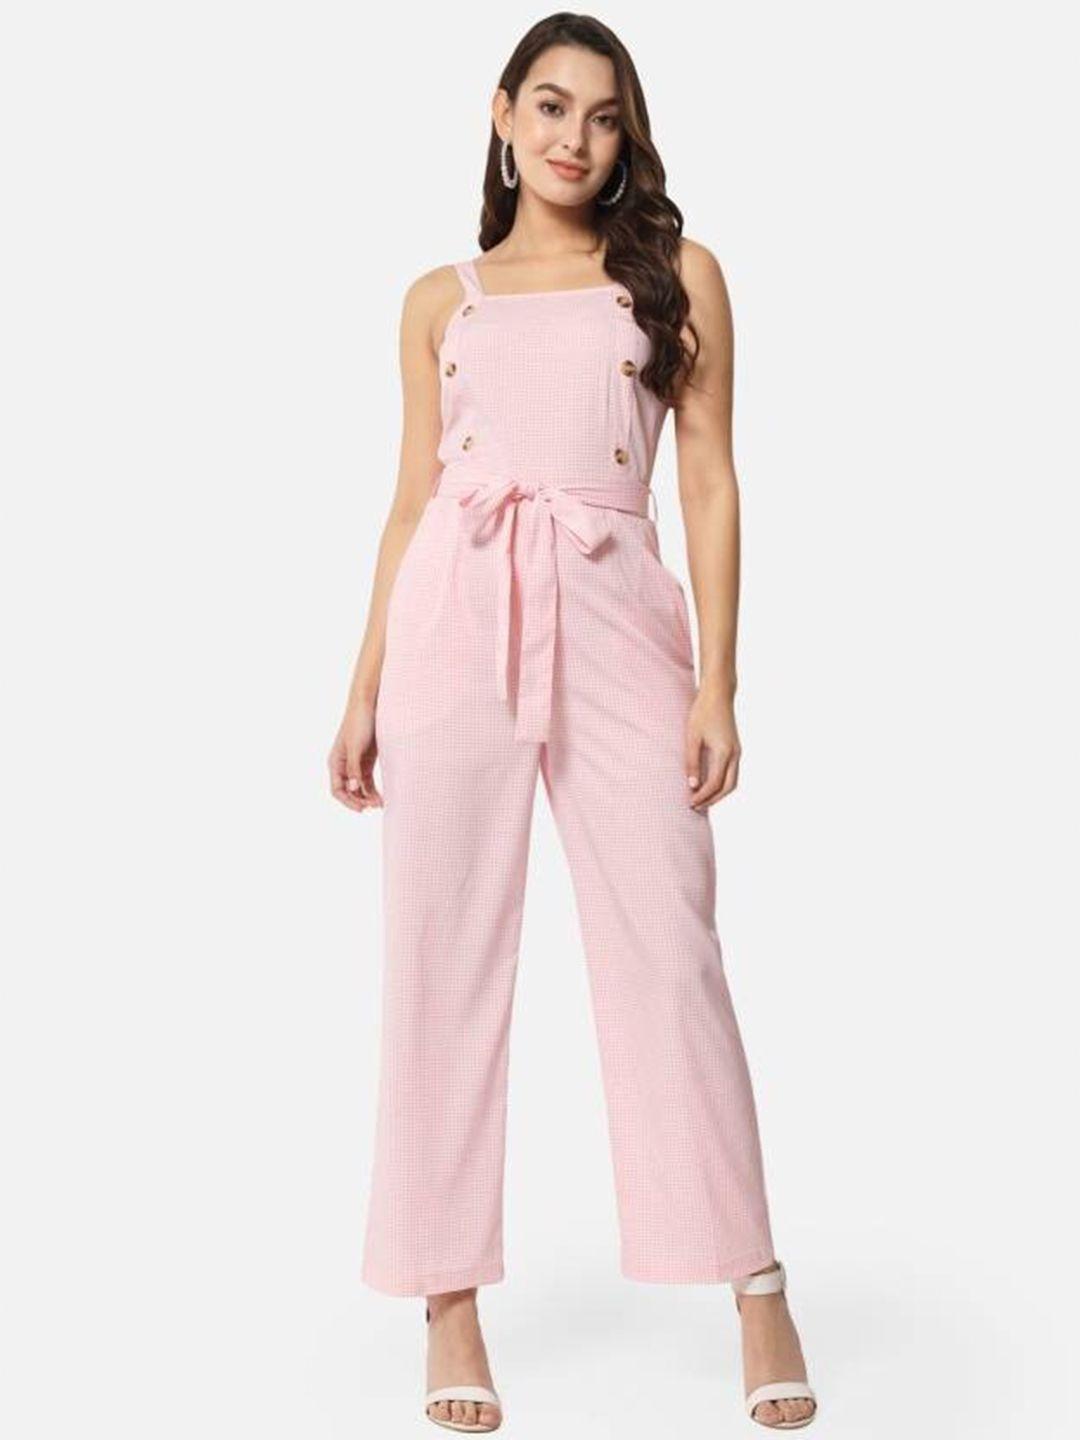 baesd-abstract-printed-shoulder-straps-waist-tie-ups-basic-jumpsuit